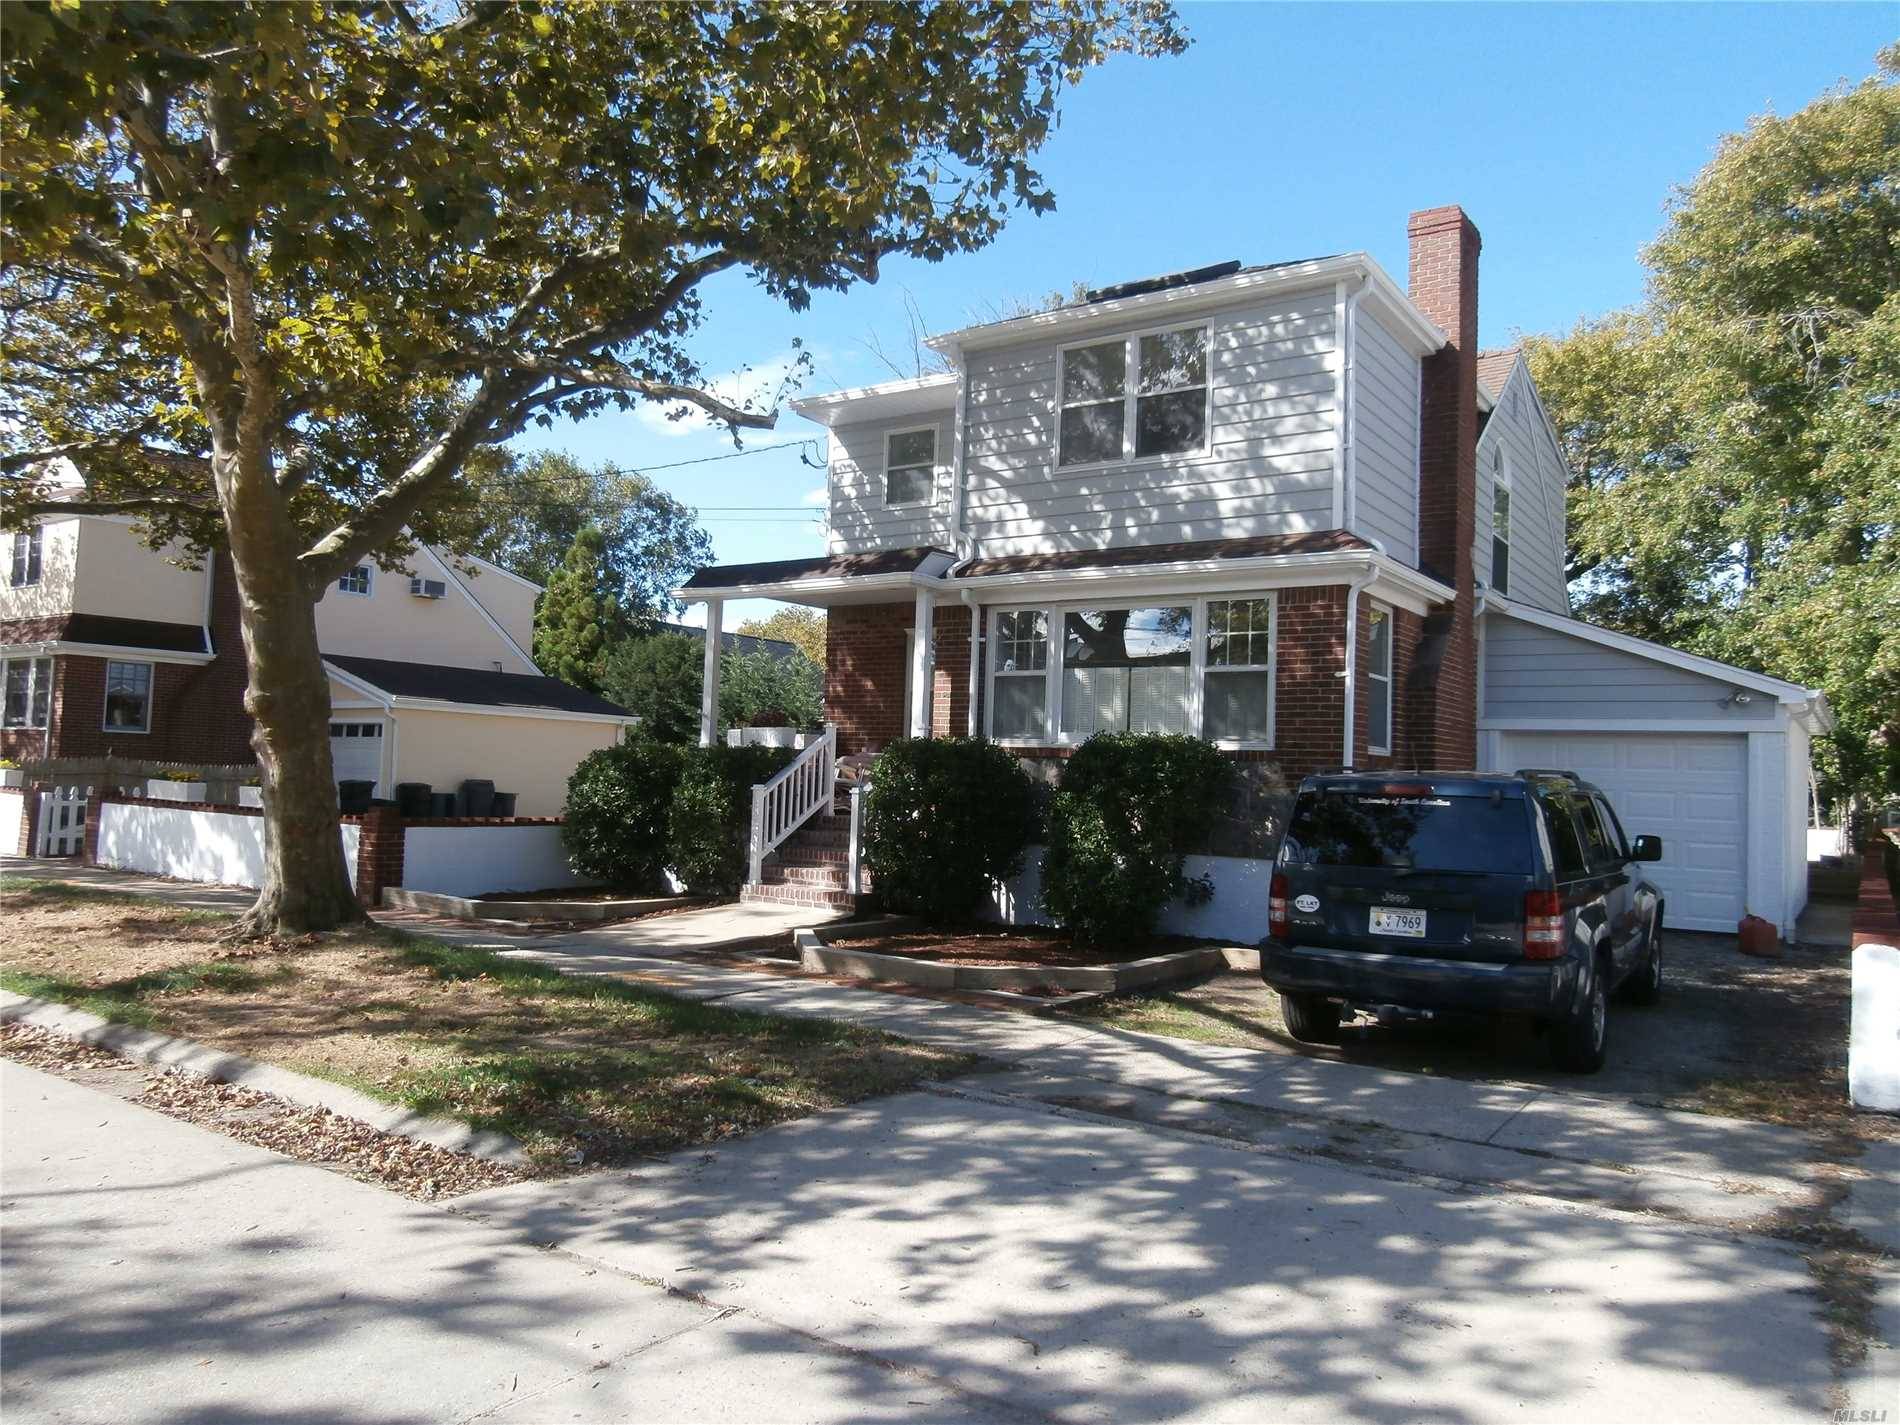 This Beach Home Is Located On Favorite Mineola Ave.